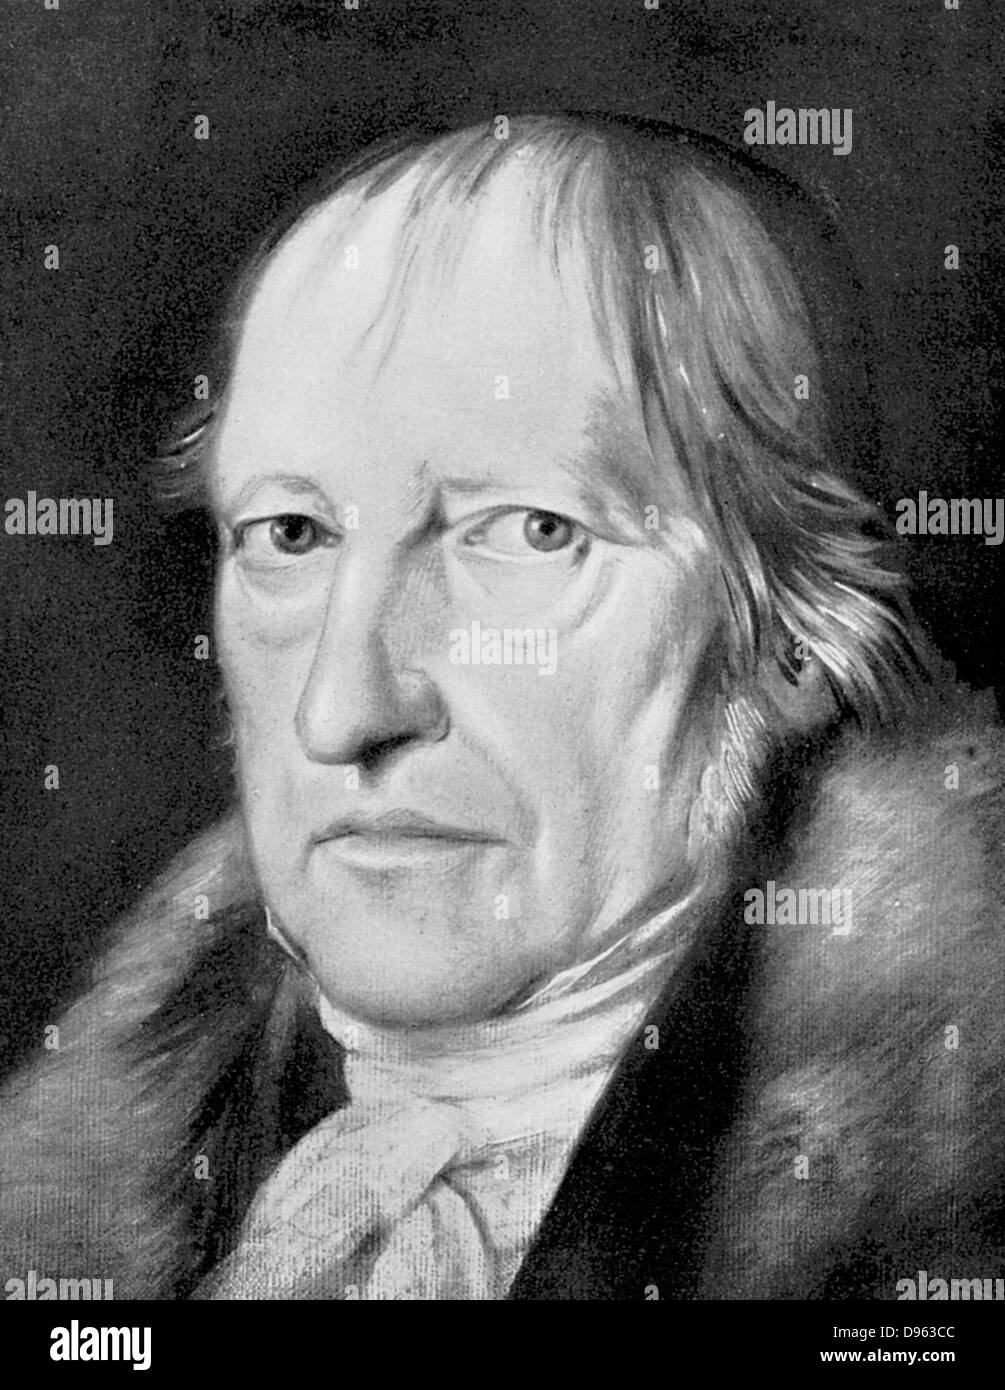 George Wilhlem Friedrich Hegel  (1770-1831) German idealist philosopher. His difficult philosophy, considered by many to be obscure, has had  great influence on Marxists, Positivists and Existentialists. Stock Photo